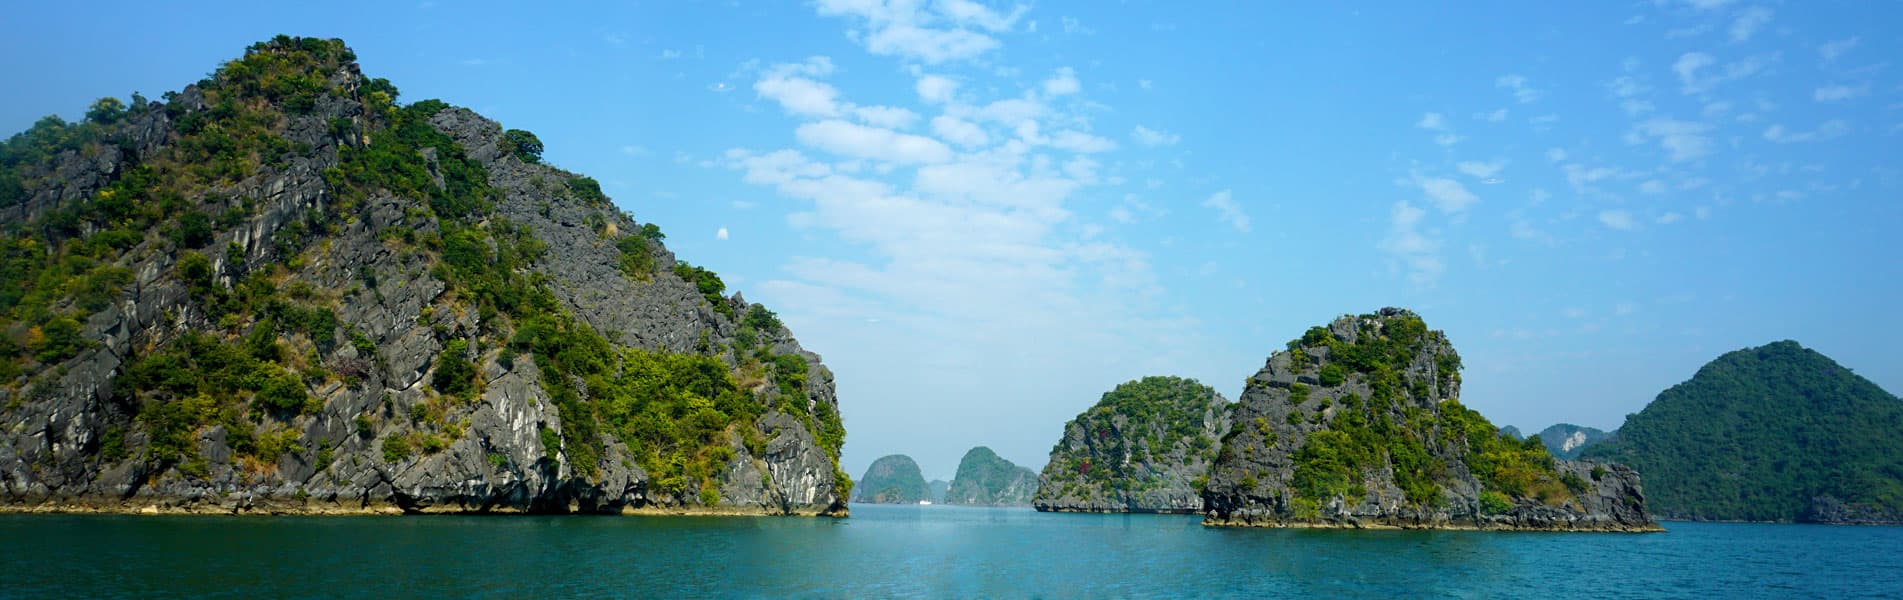 Halong Bay Day Trip - Vietnam blue waters